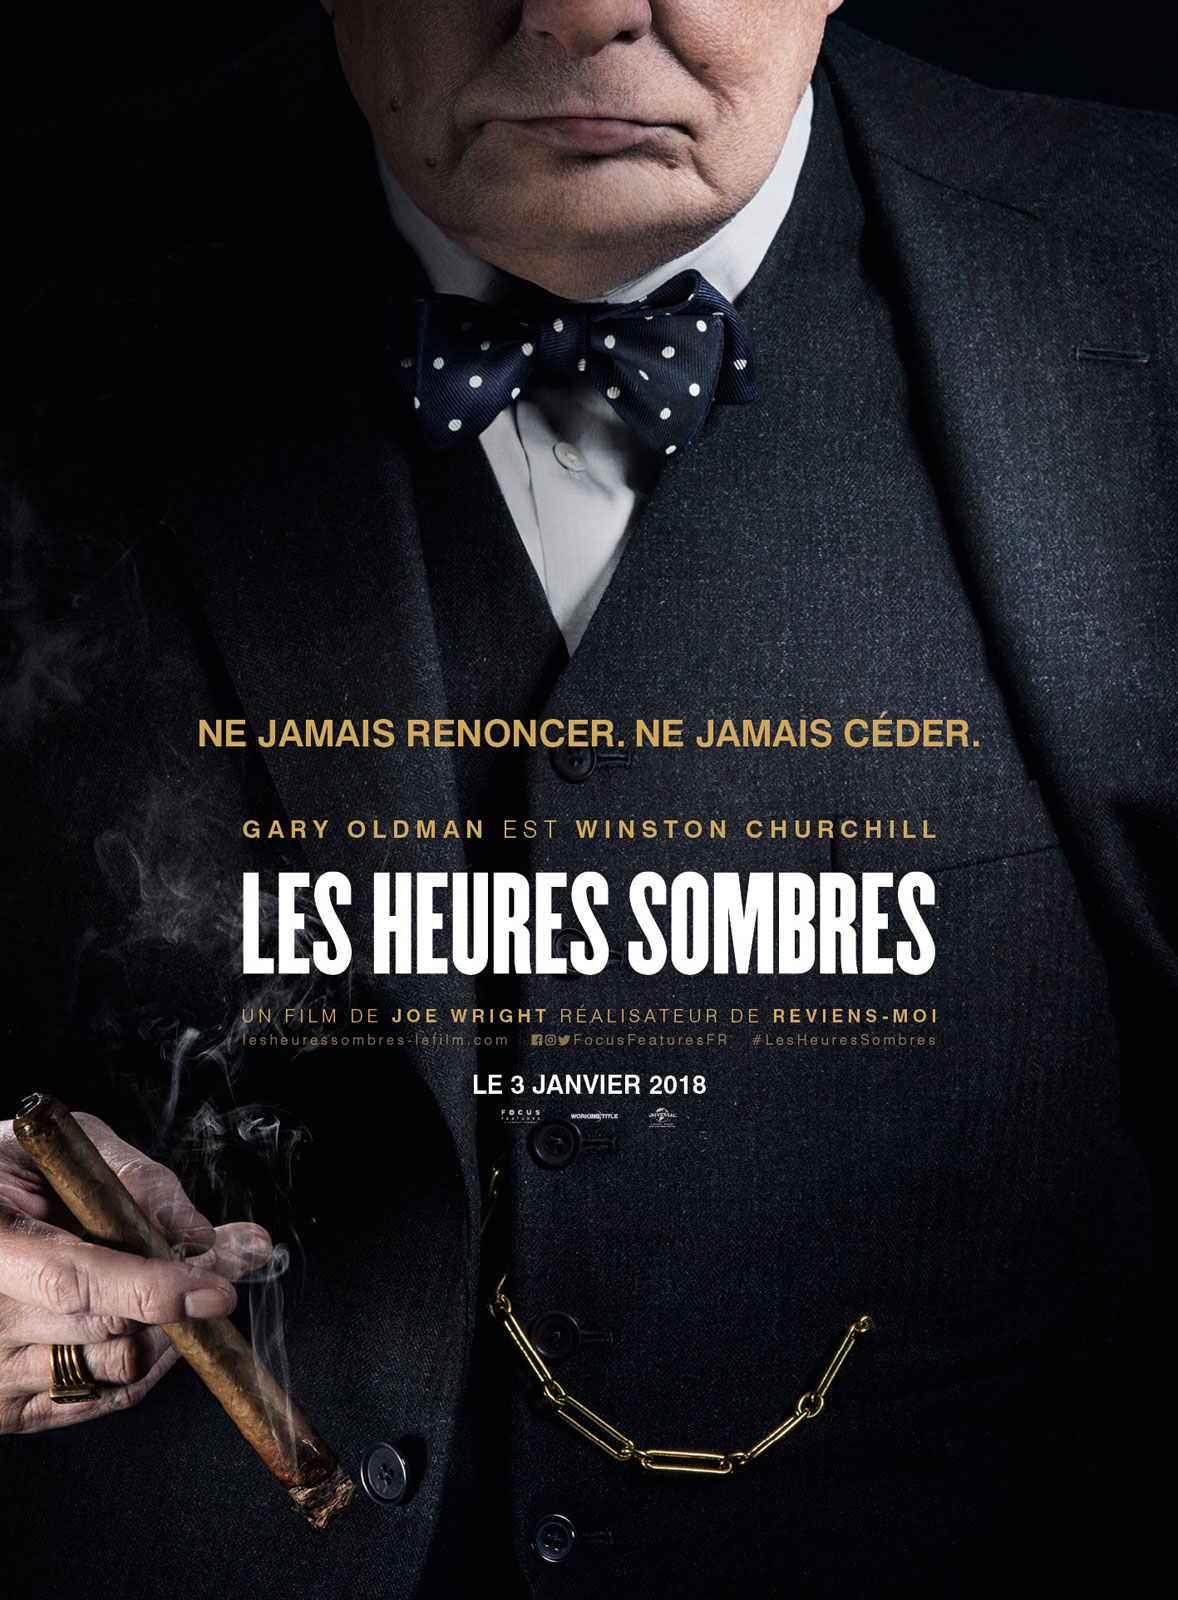 Les heures sombres FRENCH BluRay 1080p 2018